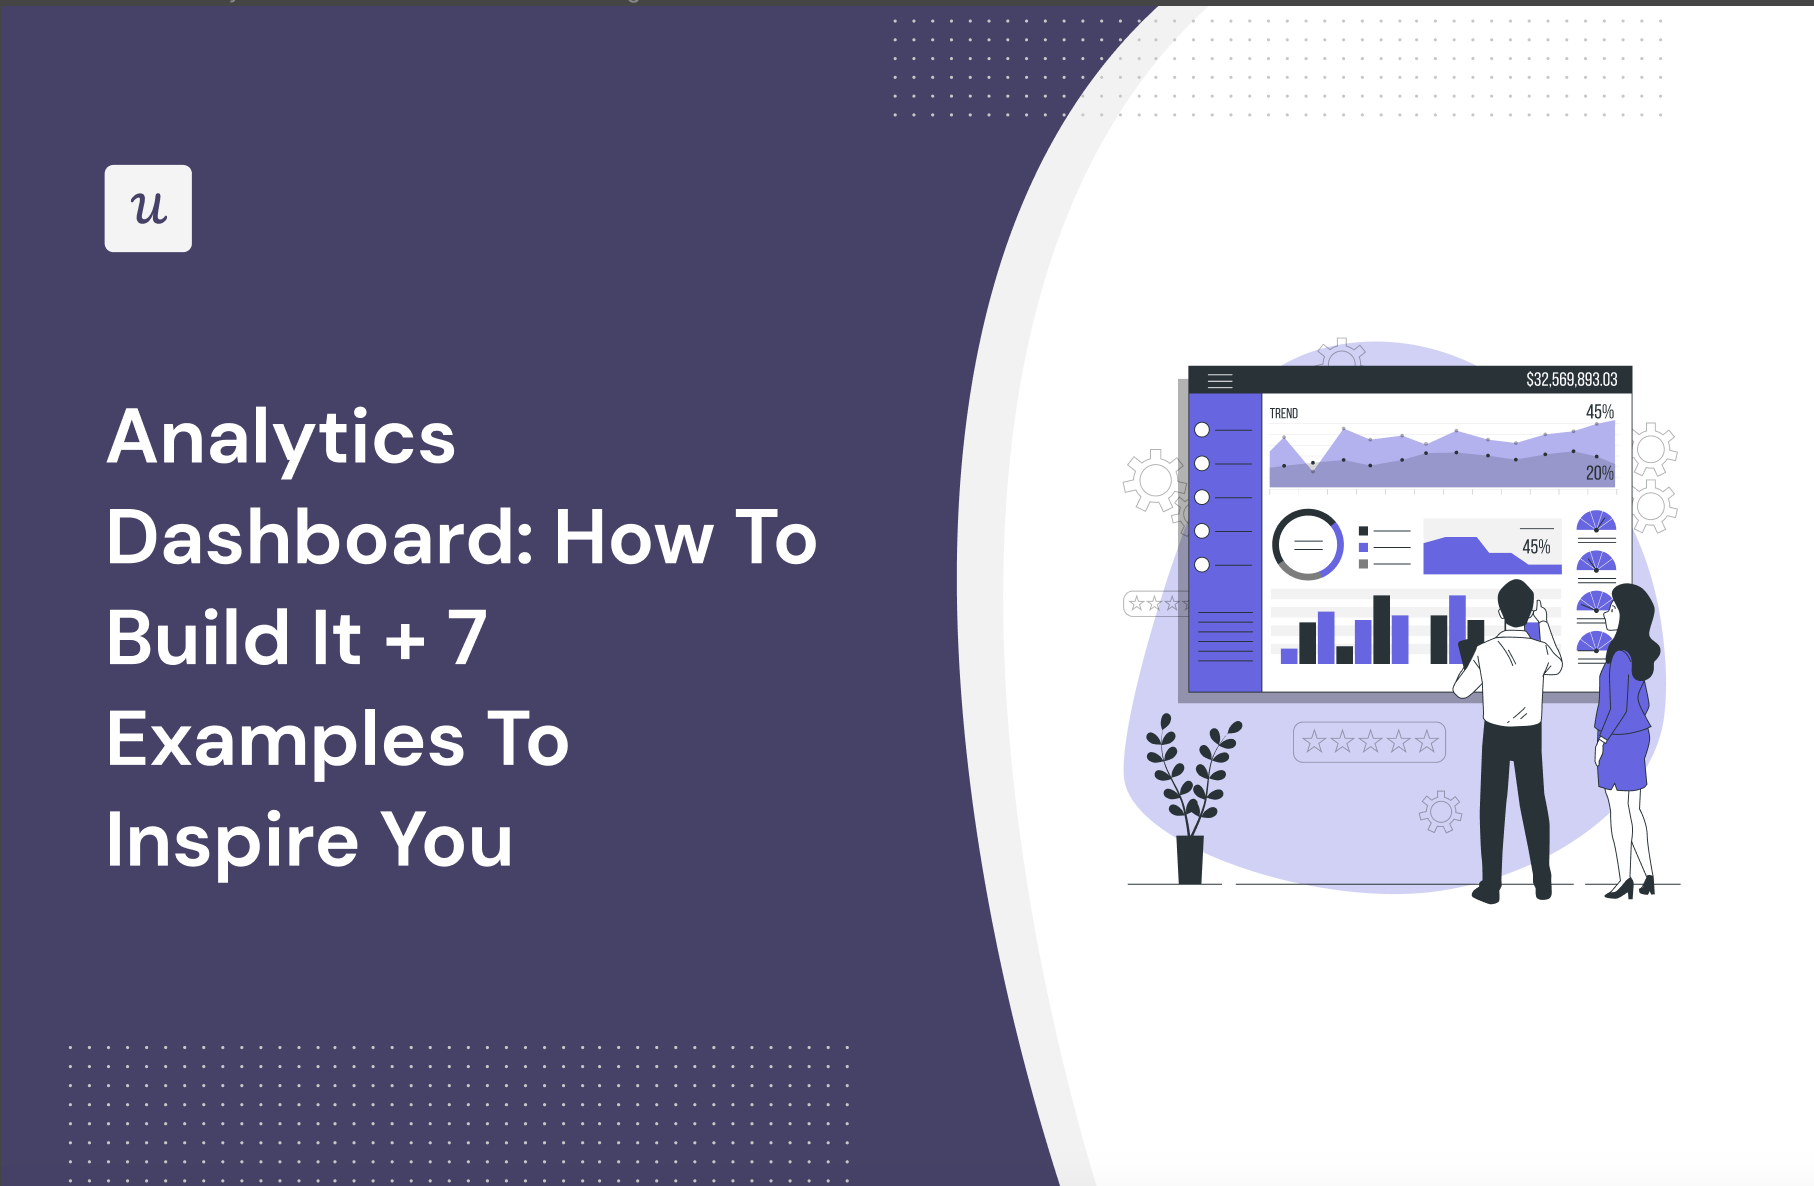 Analytics Dashboard: How To Build It + 7 Examples To Inspire You